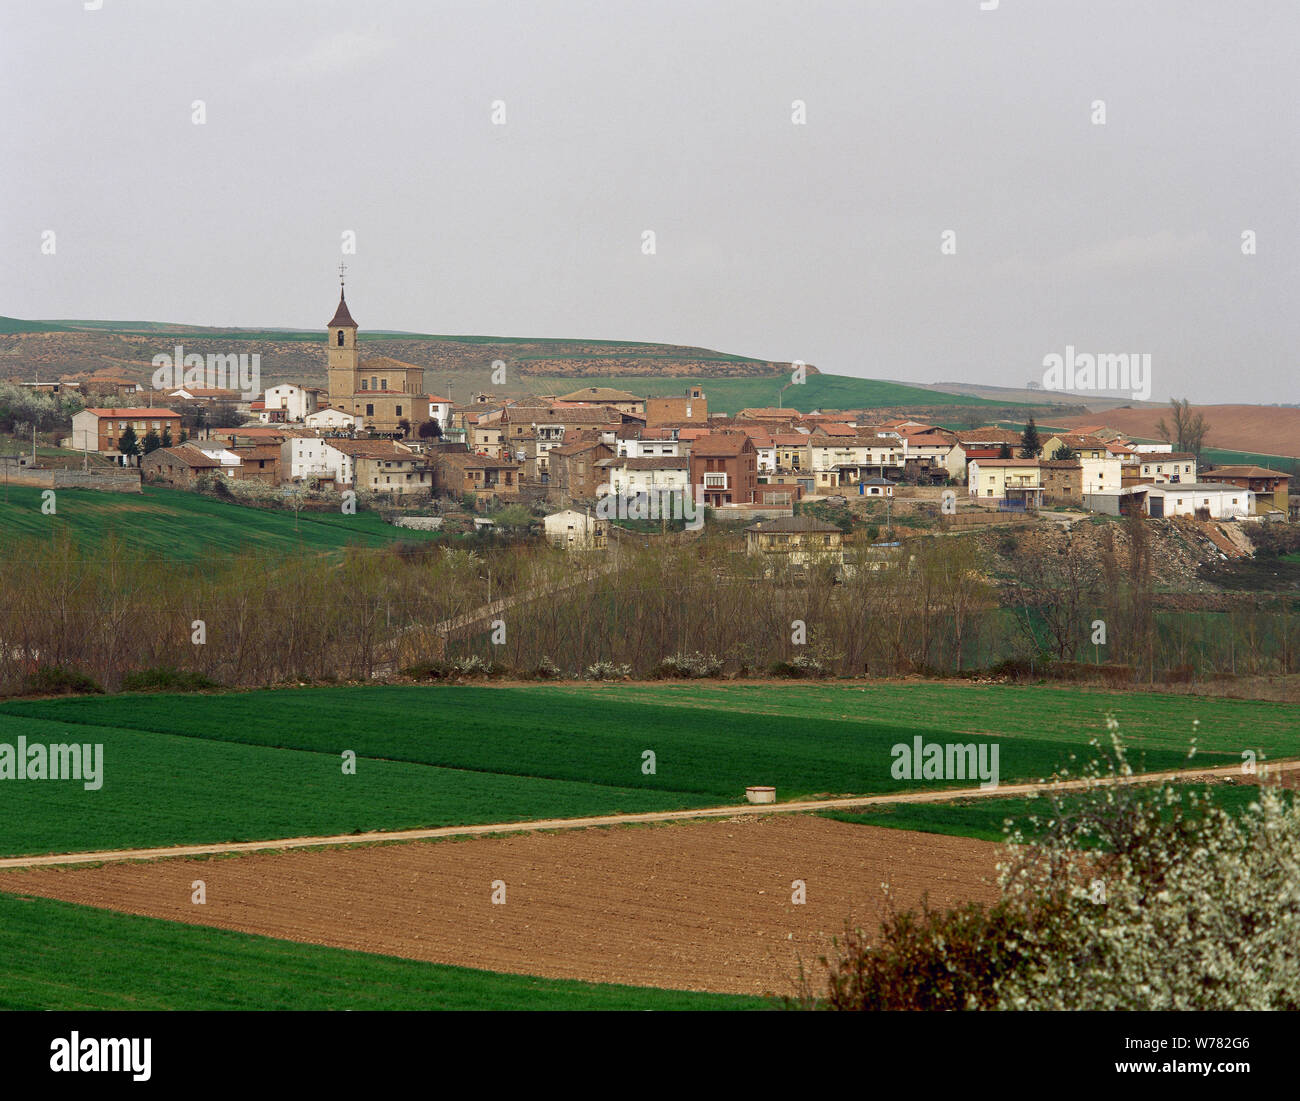 Spain. La Rioja. Berceo. Panoramic of the village, birthplace of the medieval poet Gonzalo de Berceo (ca. 1195-ca. 1268). He was the first poet in Castilian language known. Stock Photo